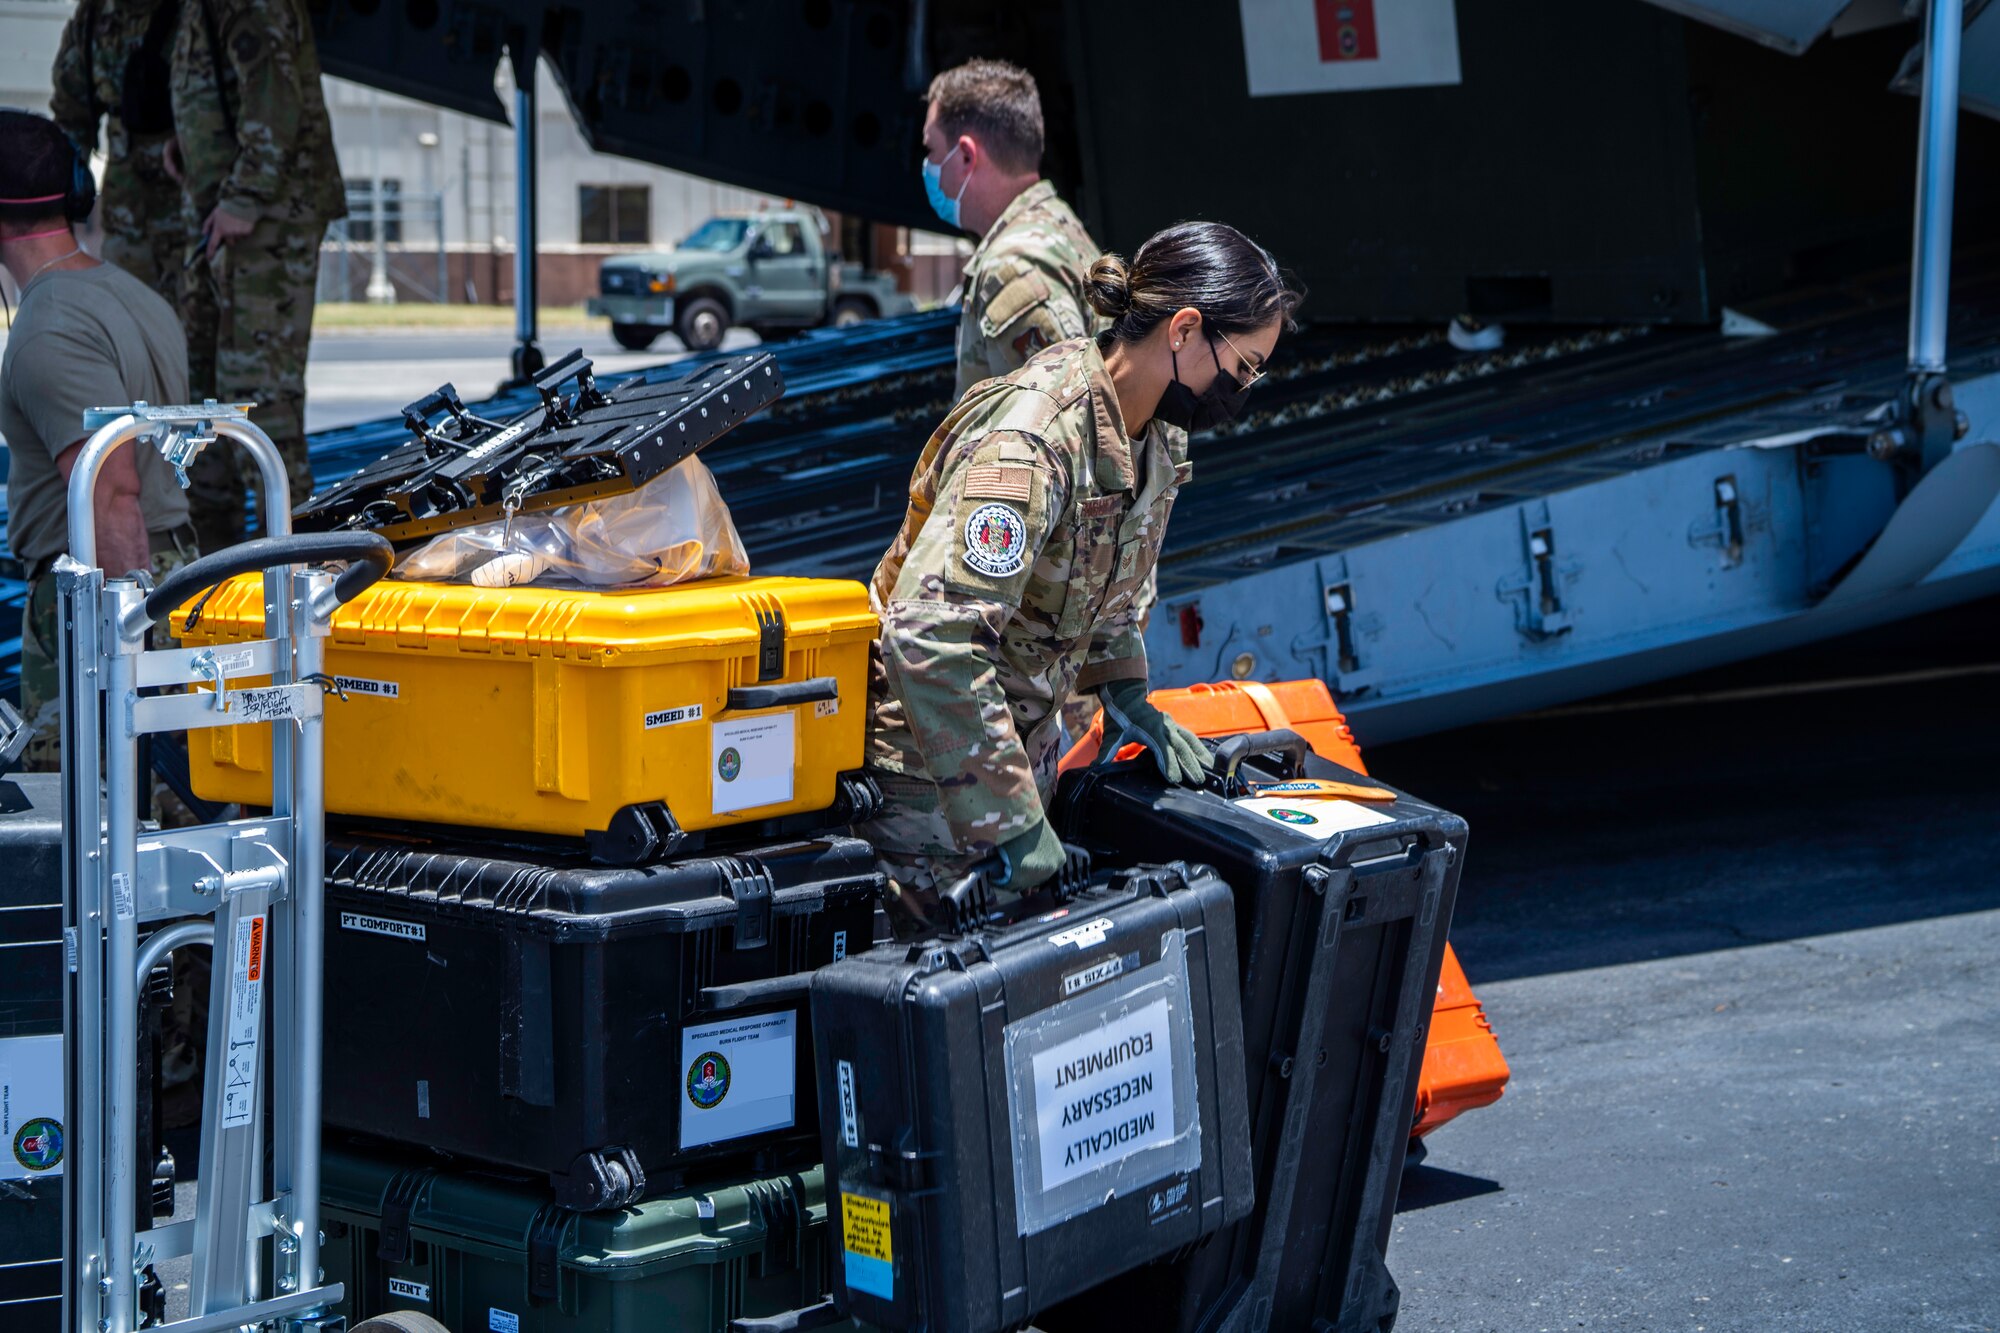 Staff Sgt. Abigail Rodriguez, 18th
Aeromedical Evacuation Squadron,
Detachment 1, Noncommissioned officer in
charge, loads medical equipment for an
Aeromedical Evacuation Mission at Joint
Base Pearl Harbor-Hickam, Hawaii, July 27,
2022. The primary mission of the 18th AES
is to support medical operations in the Indo-
Pacific region during wartime, various
contingencies, and natural disaster relief
operations. (U.S. Air Force photo by Senior
Airman Makensie Cooper) (Image altered
for PII purposes)